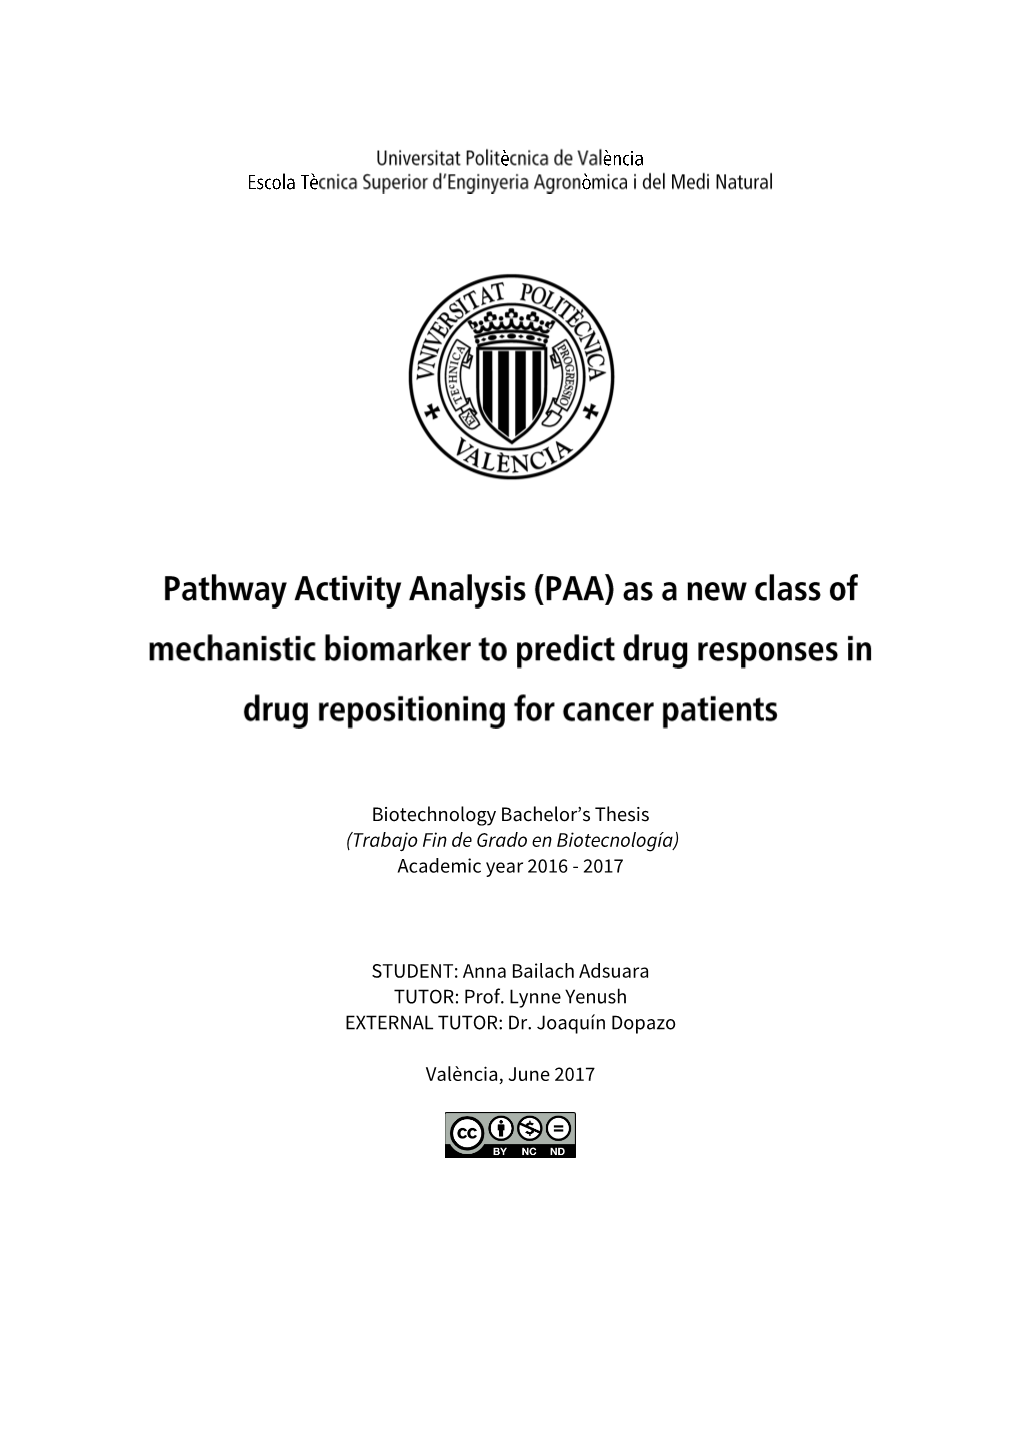 Pathway Activity Analysis As a New Class of Mechanistic Biomarker To